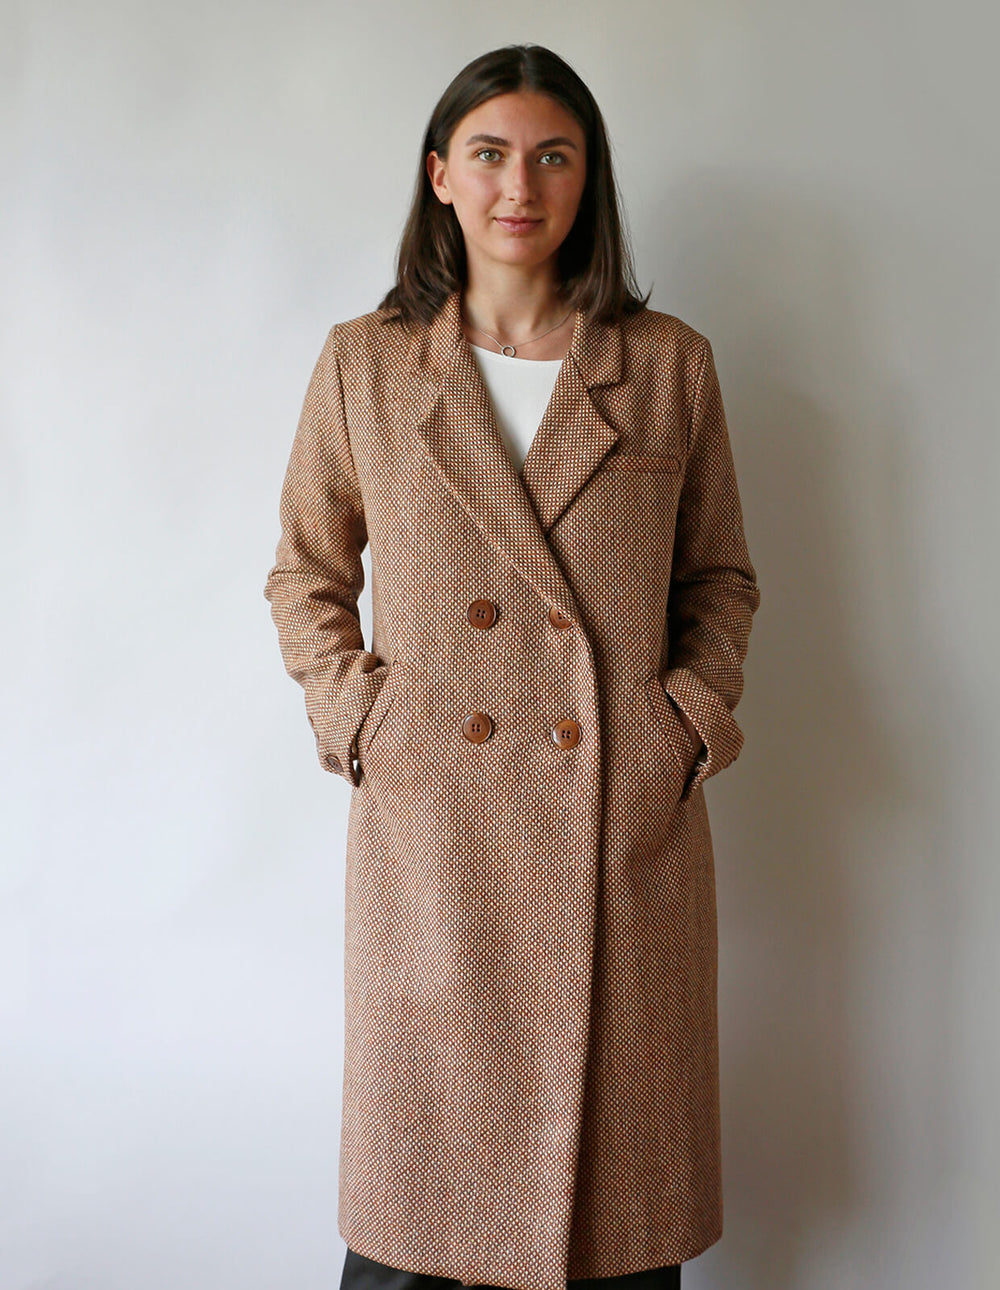 Woman wearing the Classic Coat sewing pattern from The Maker's Atelier on The Fold Line. A double-breasted coat pattern made in medium weight coating fabrics, wools, tweeds, velvet, or corduroys fabrics, featuring a straight silhouette, set-in two-piece s